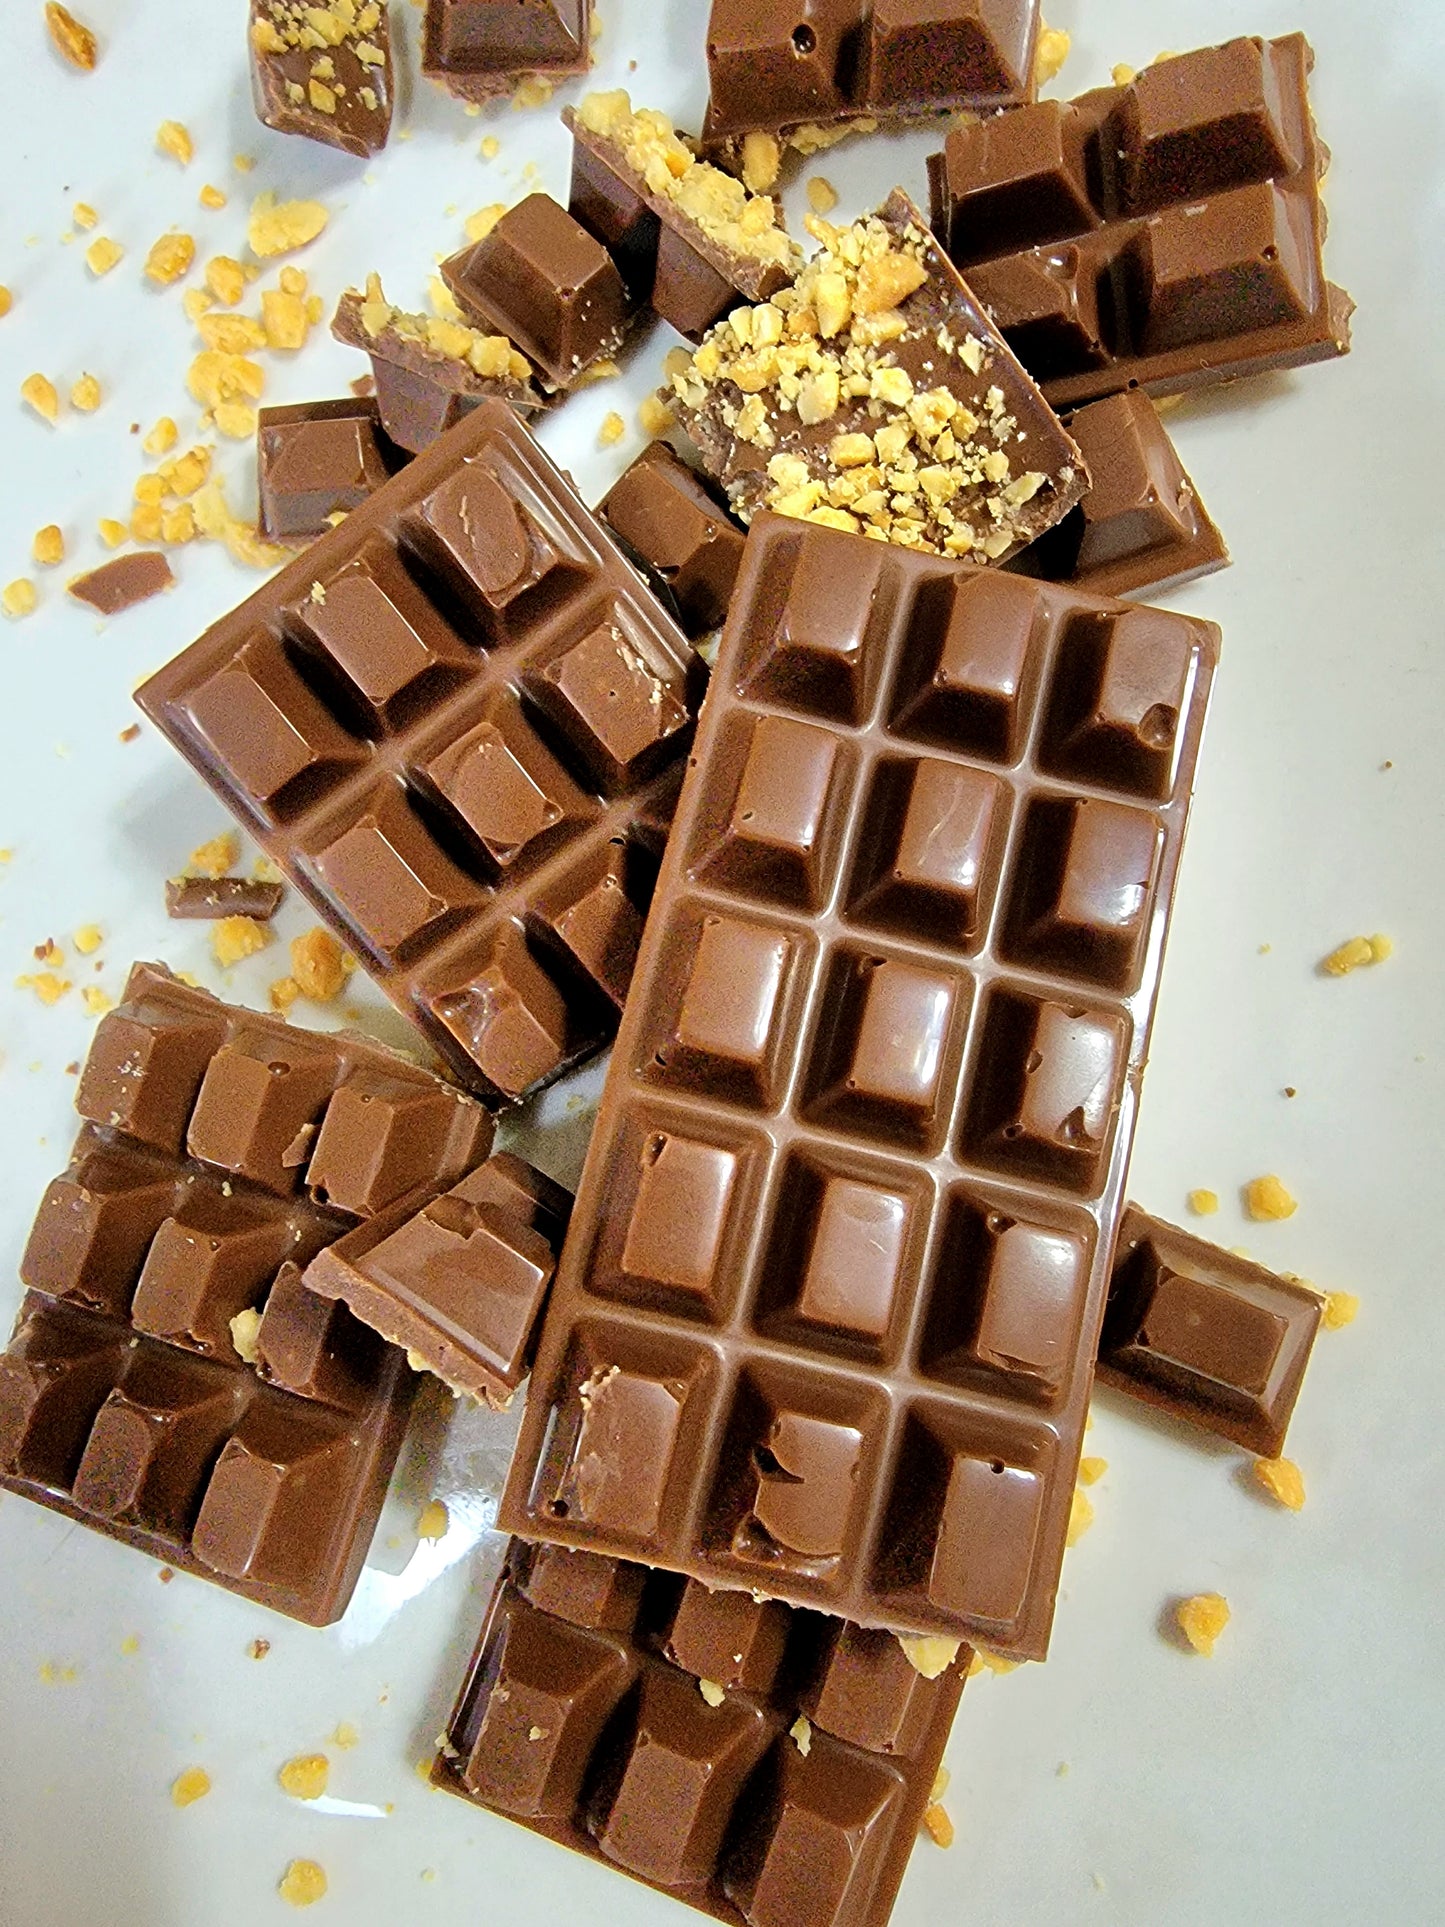 Cooking With Cannabis - DIY Chocolates August 31st